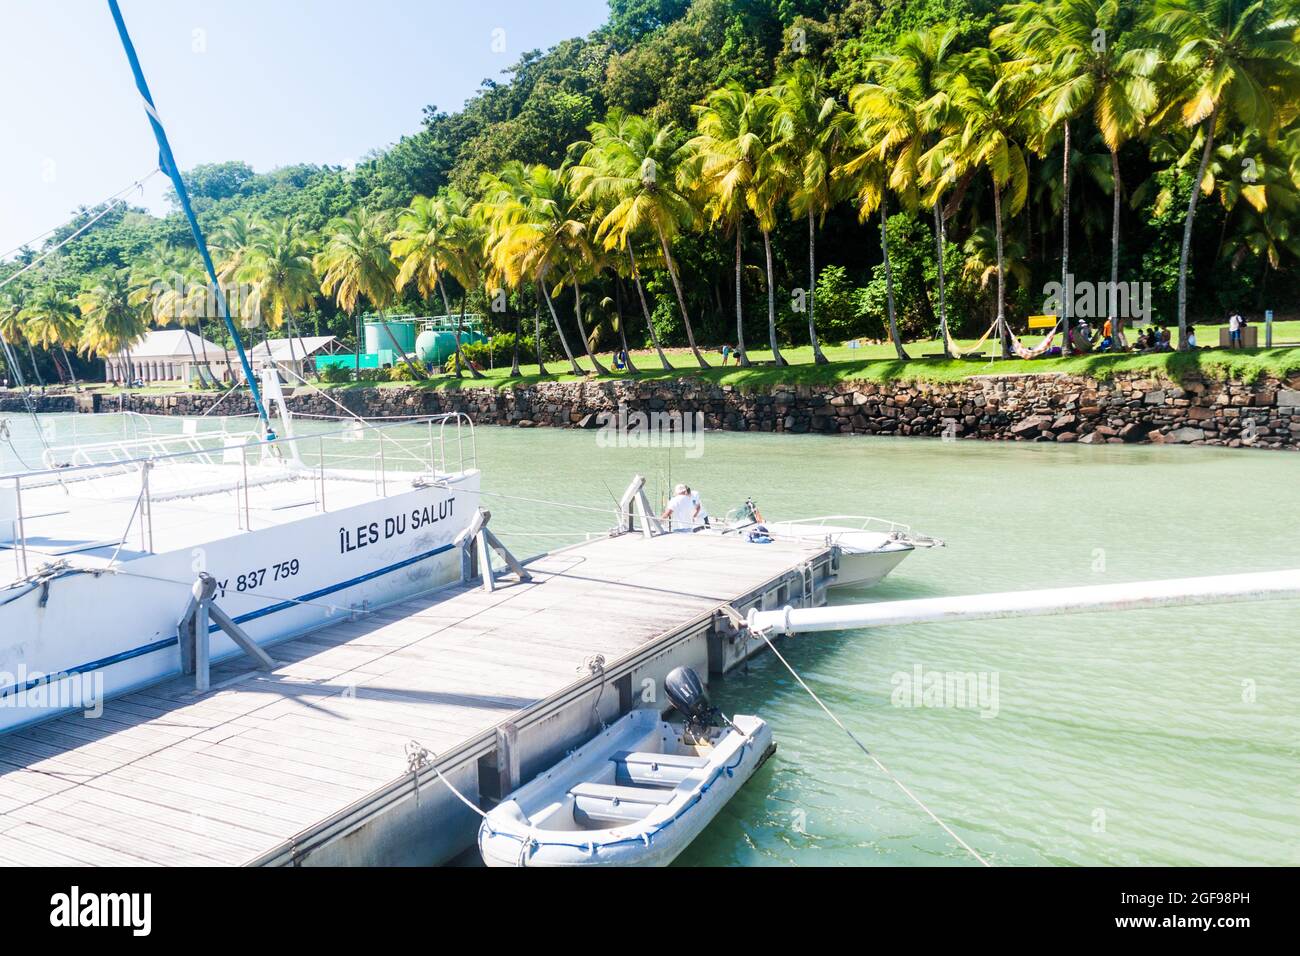 ILE ROYALE, FRENCH GUIANA - AUGUST 2, 2015: Pier at Ile Royale, one of the islands of Iles du Salut (Islands of Salvation) in French Guiana. Stock Photo